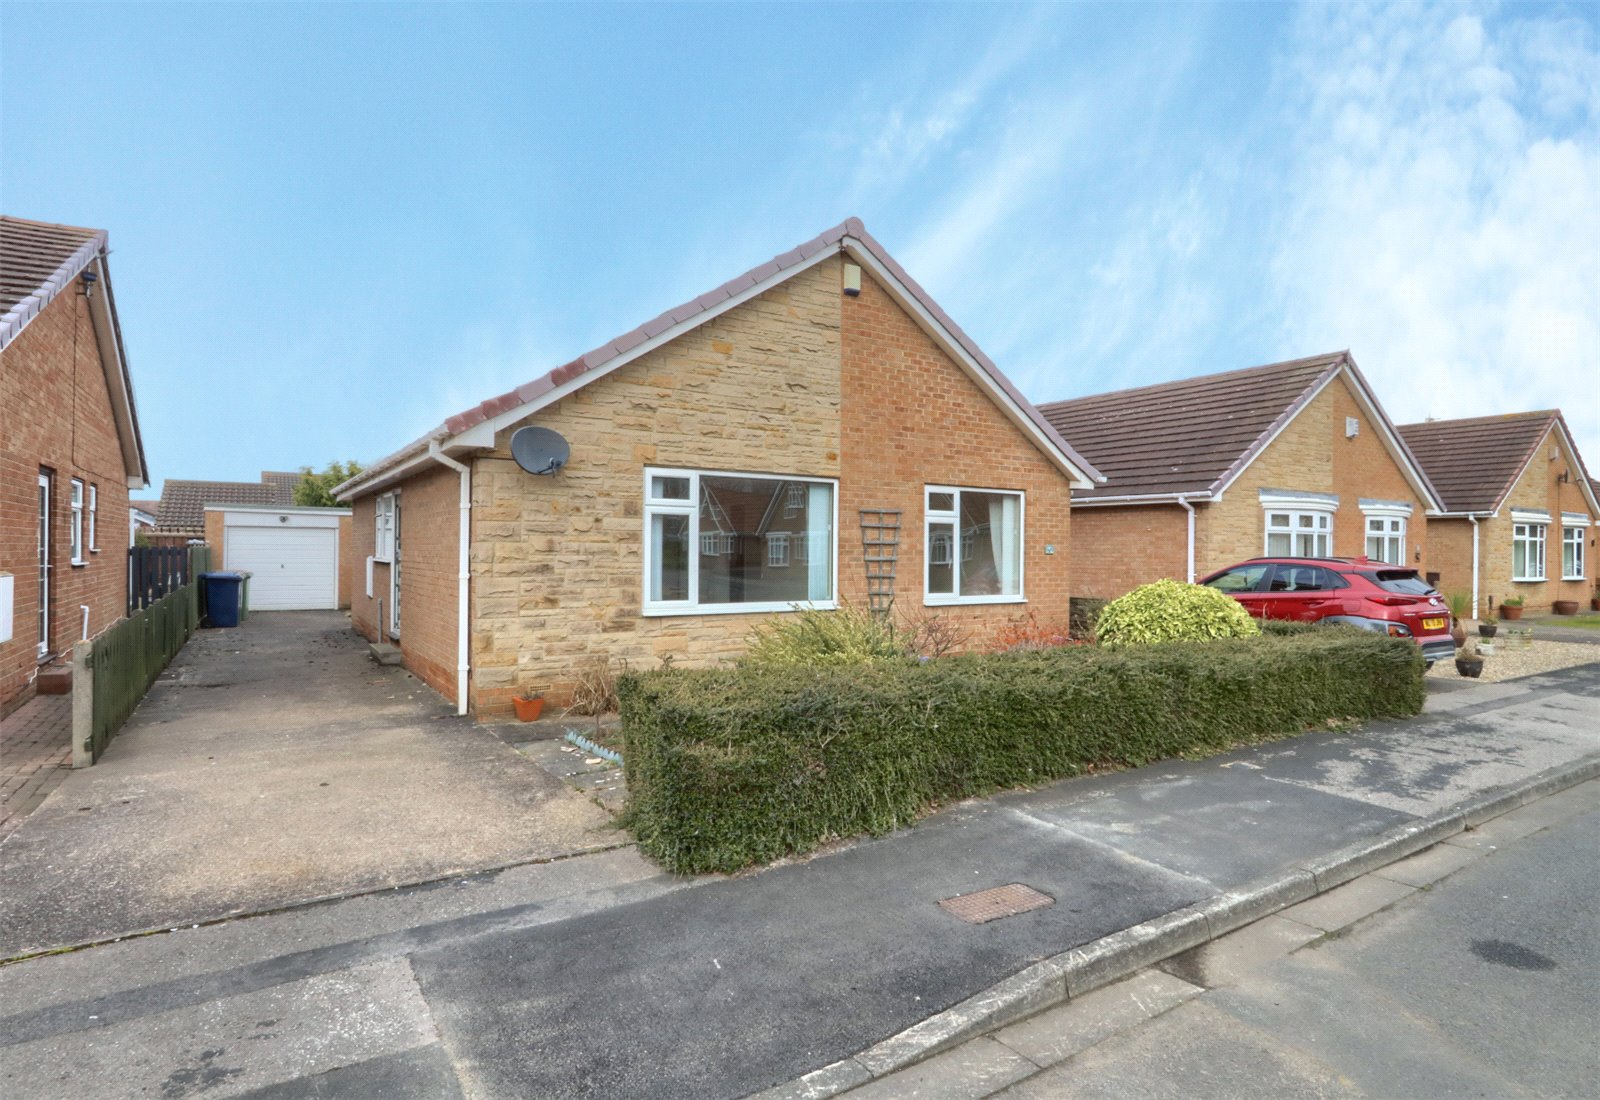 3 bed bungalow for sale in East Lodge Gardens, Kirkleatham  - Property Image 1